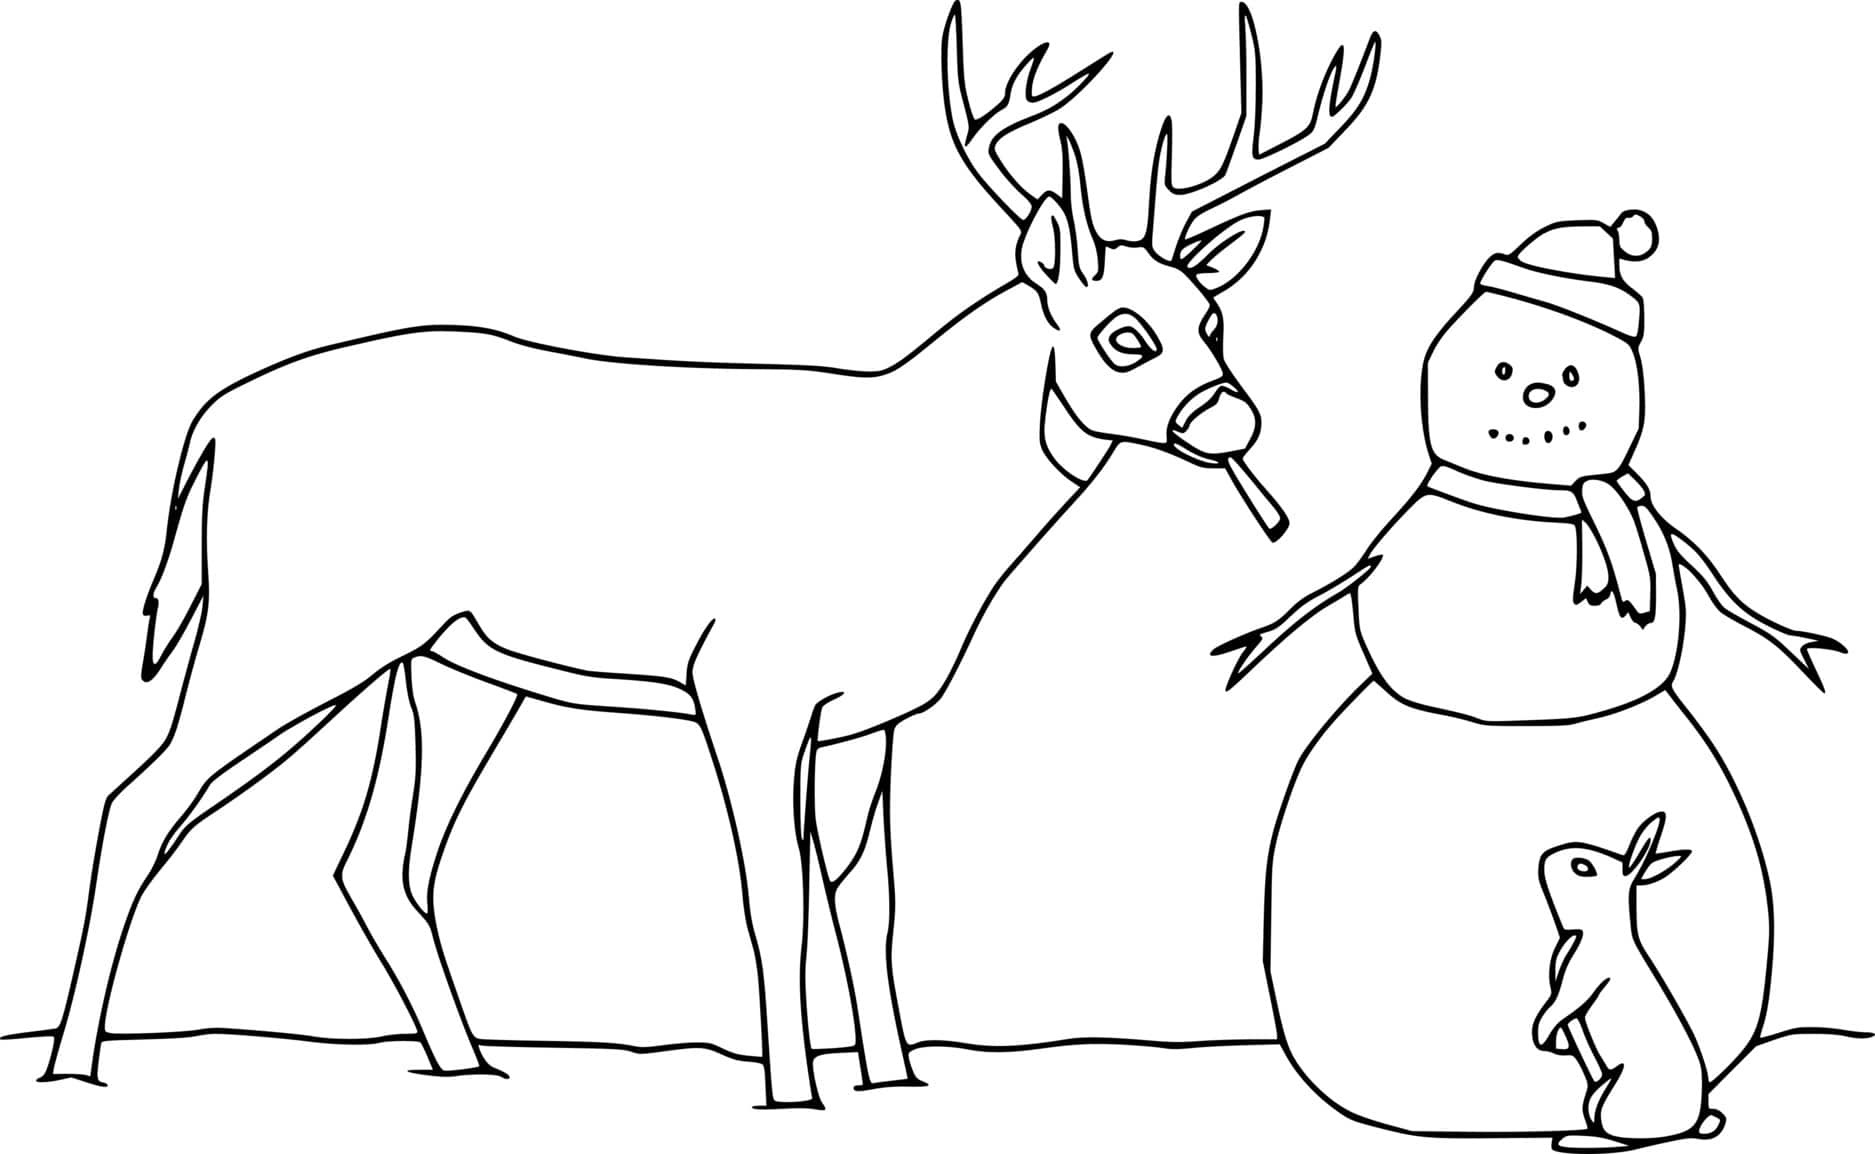 Deer And A Snowman Coloring Page